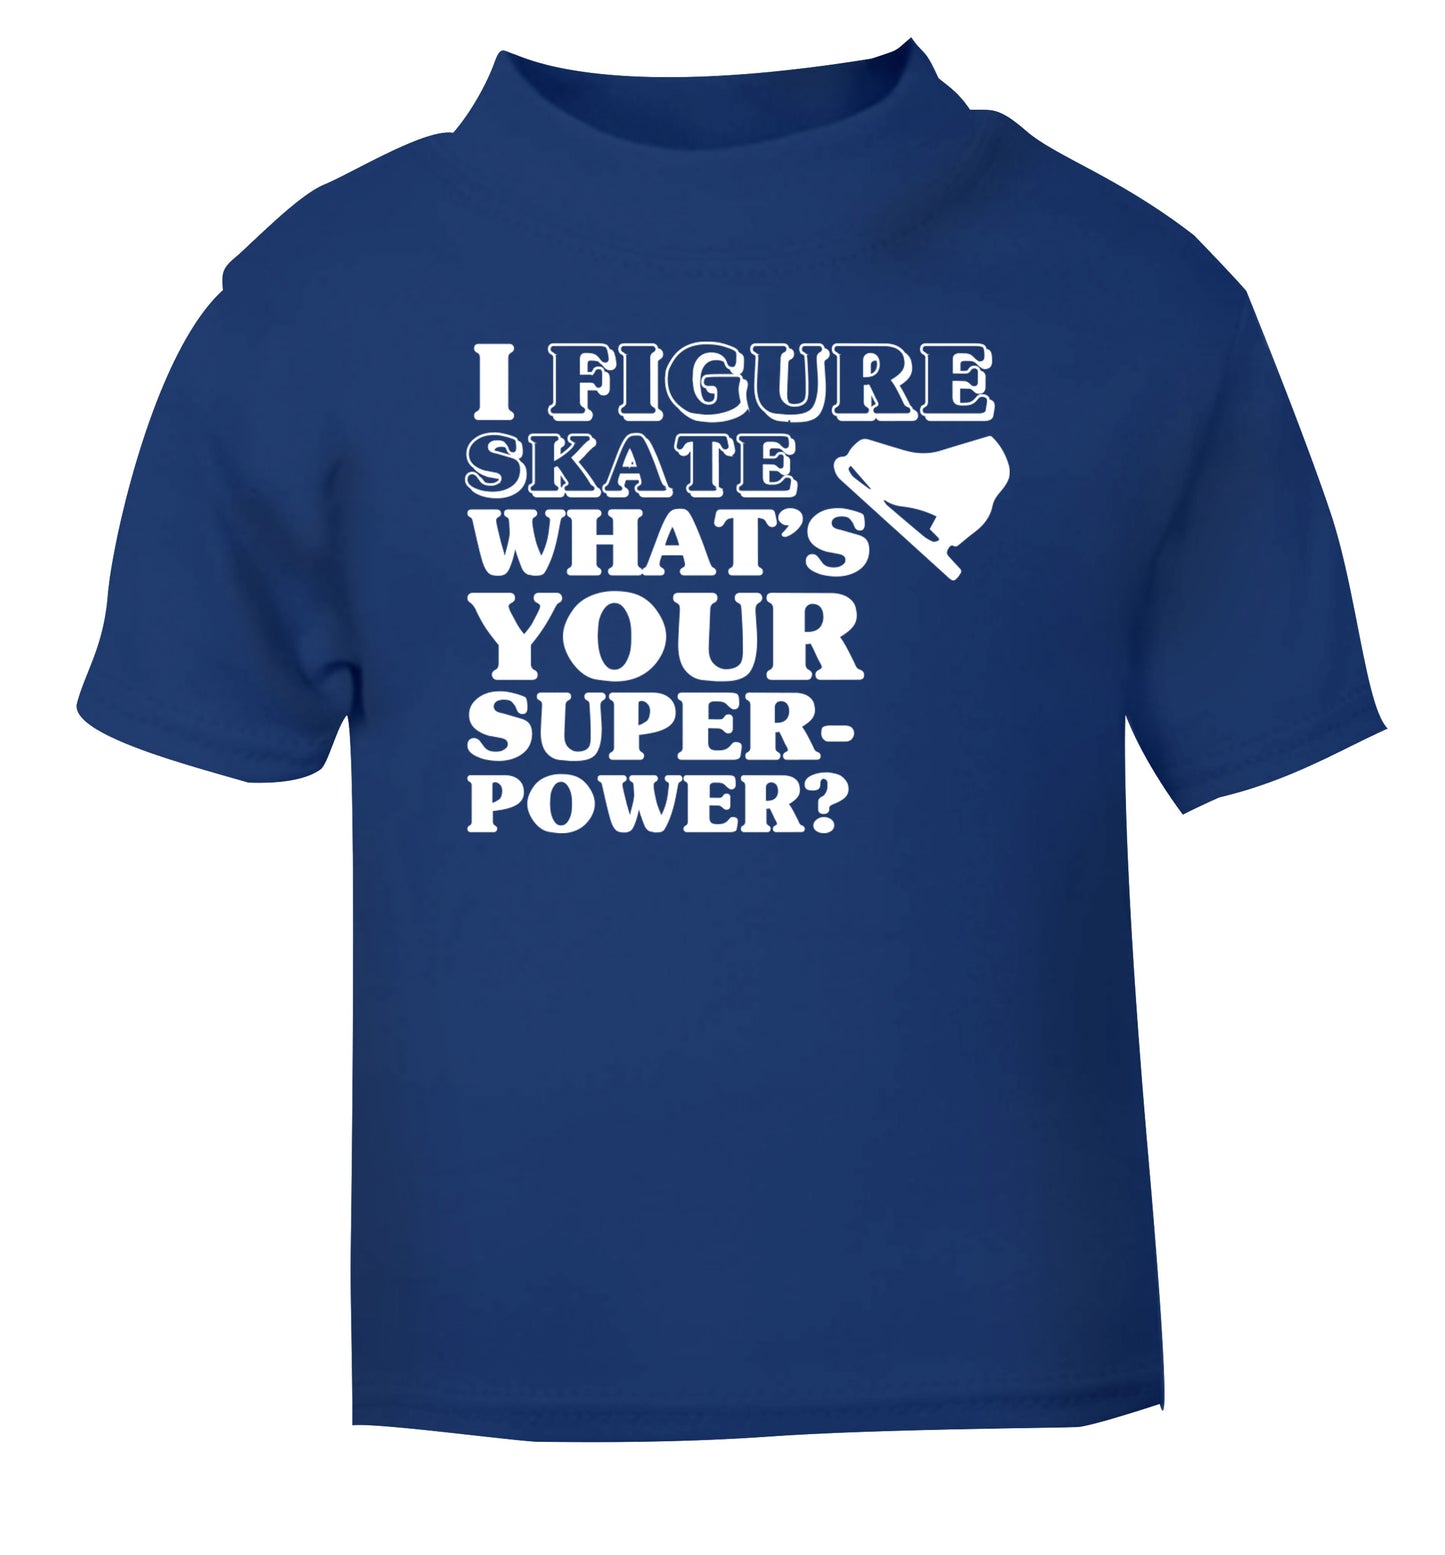 I figure skate what's your superpower? blue Baby Toddler Tshirt 2 Years